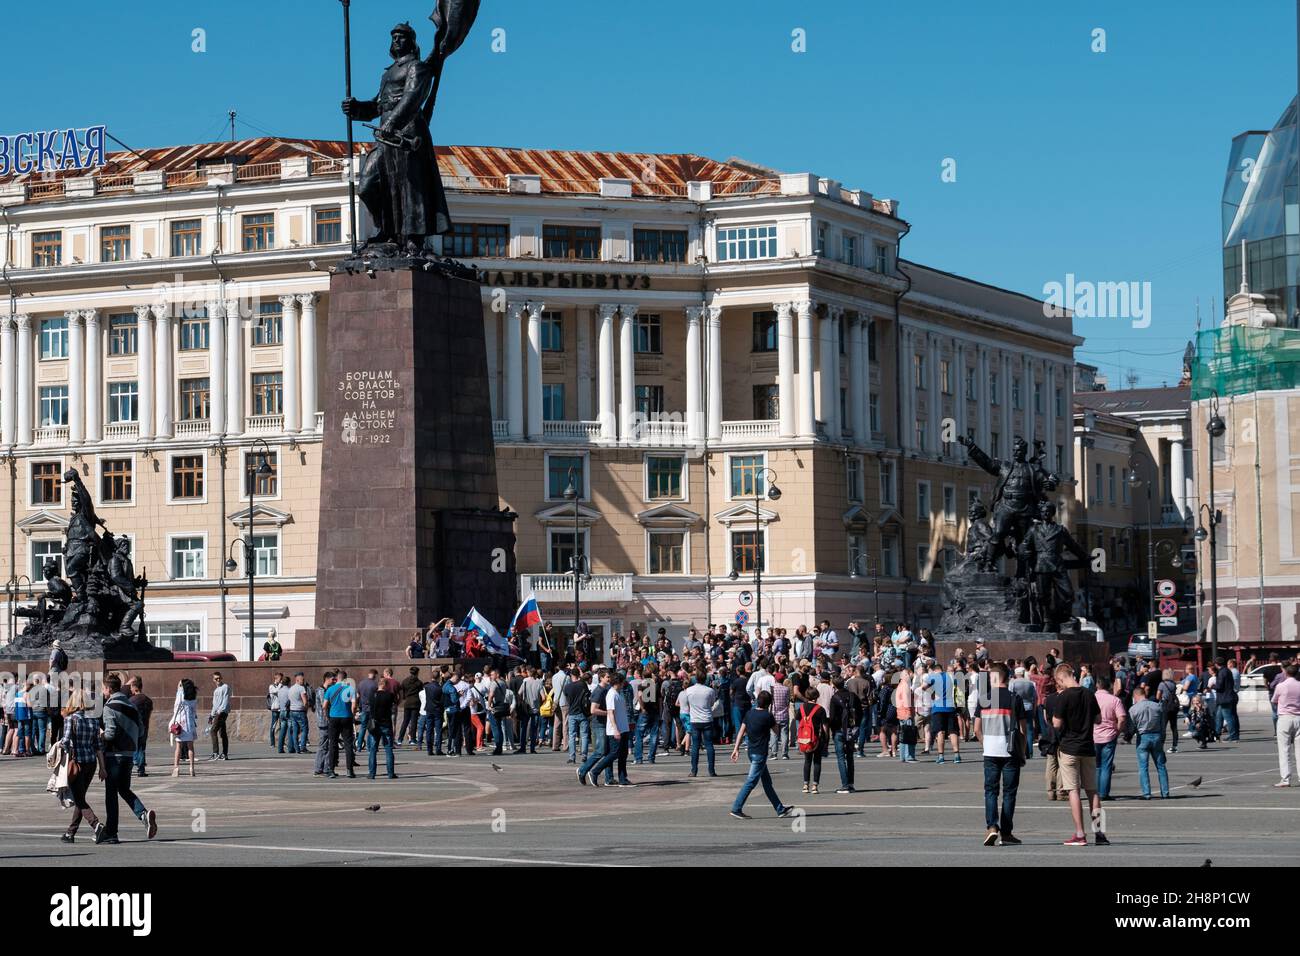 Vladivostok, Russia - September 9, 2018: A political action against raising the retirement age organized by Alexei Navalny. Stock Photo